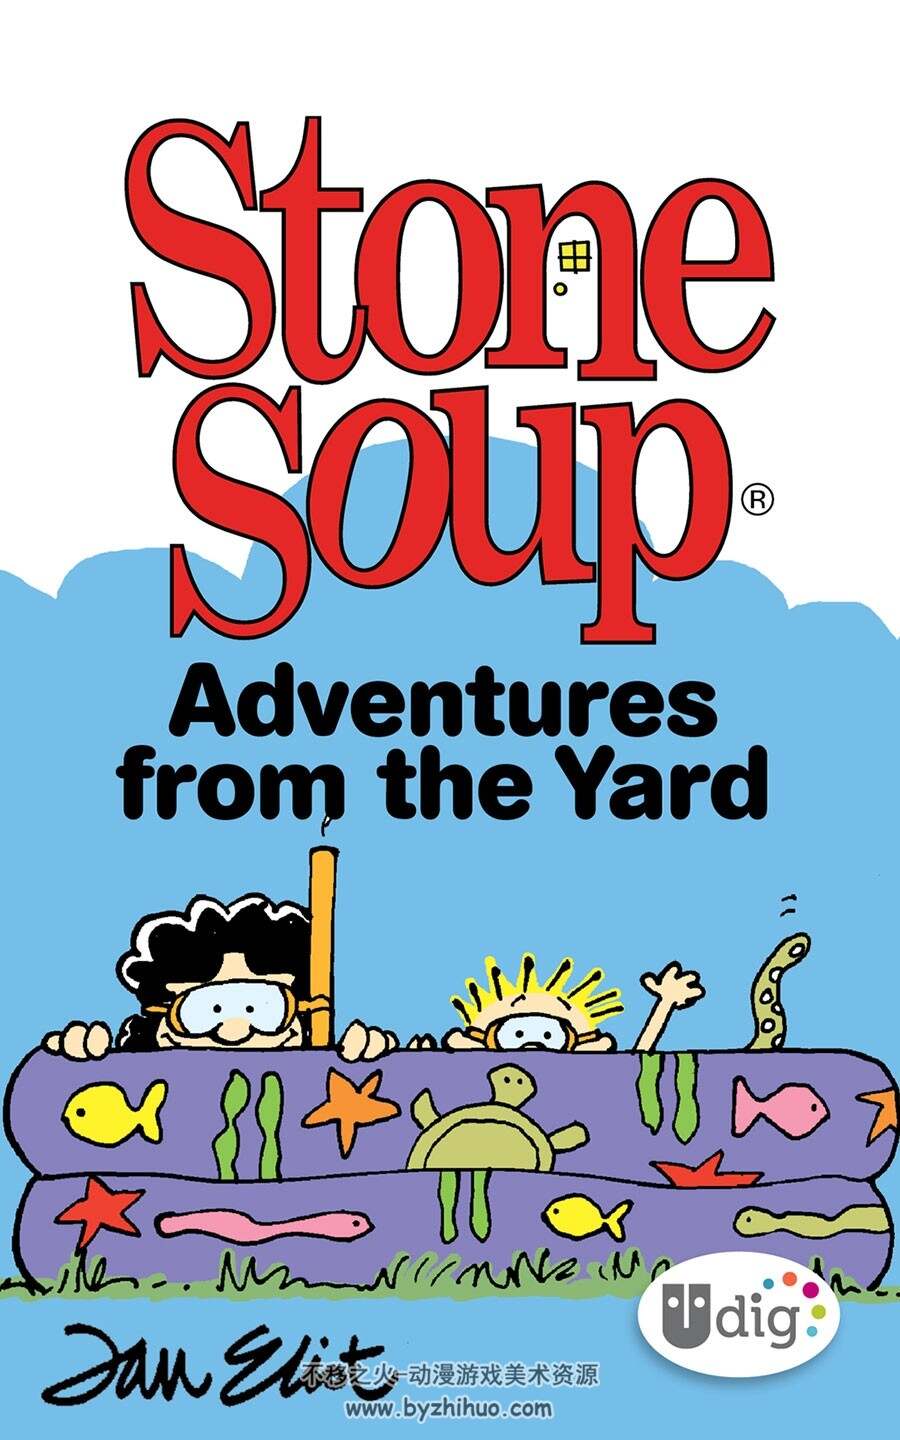 Stone Soup Adventures from the Yard 漫画 百度网盘下载